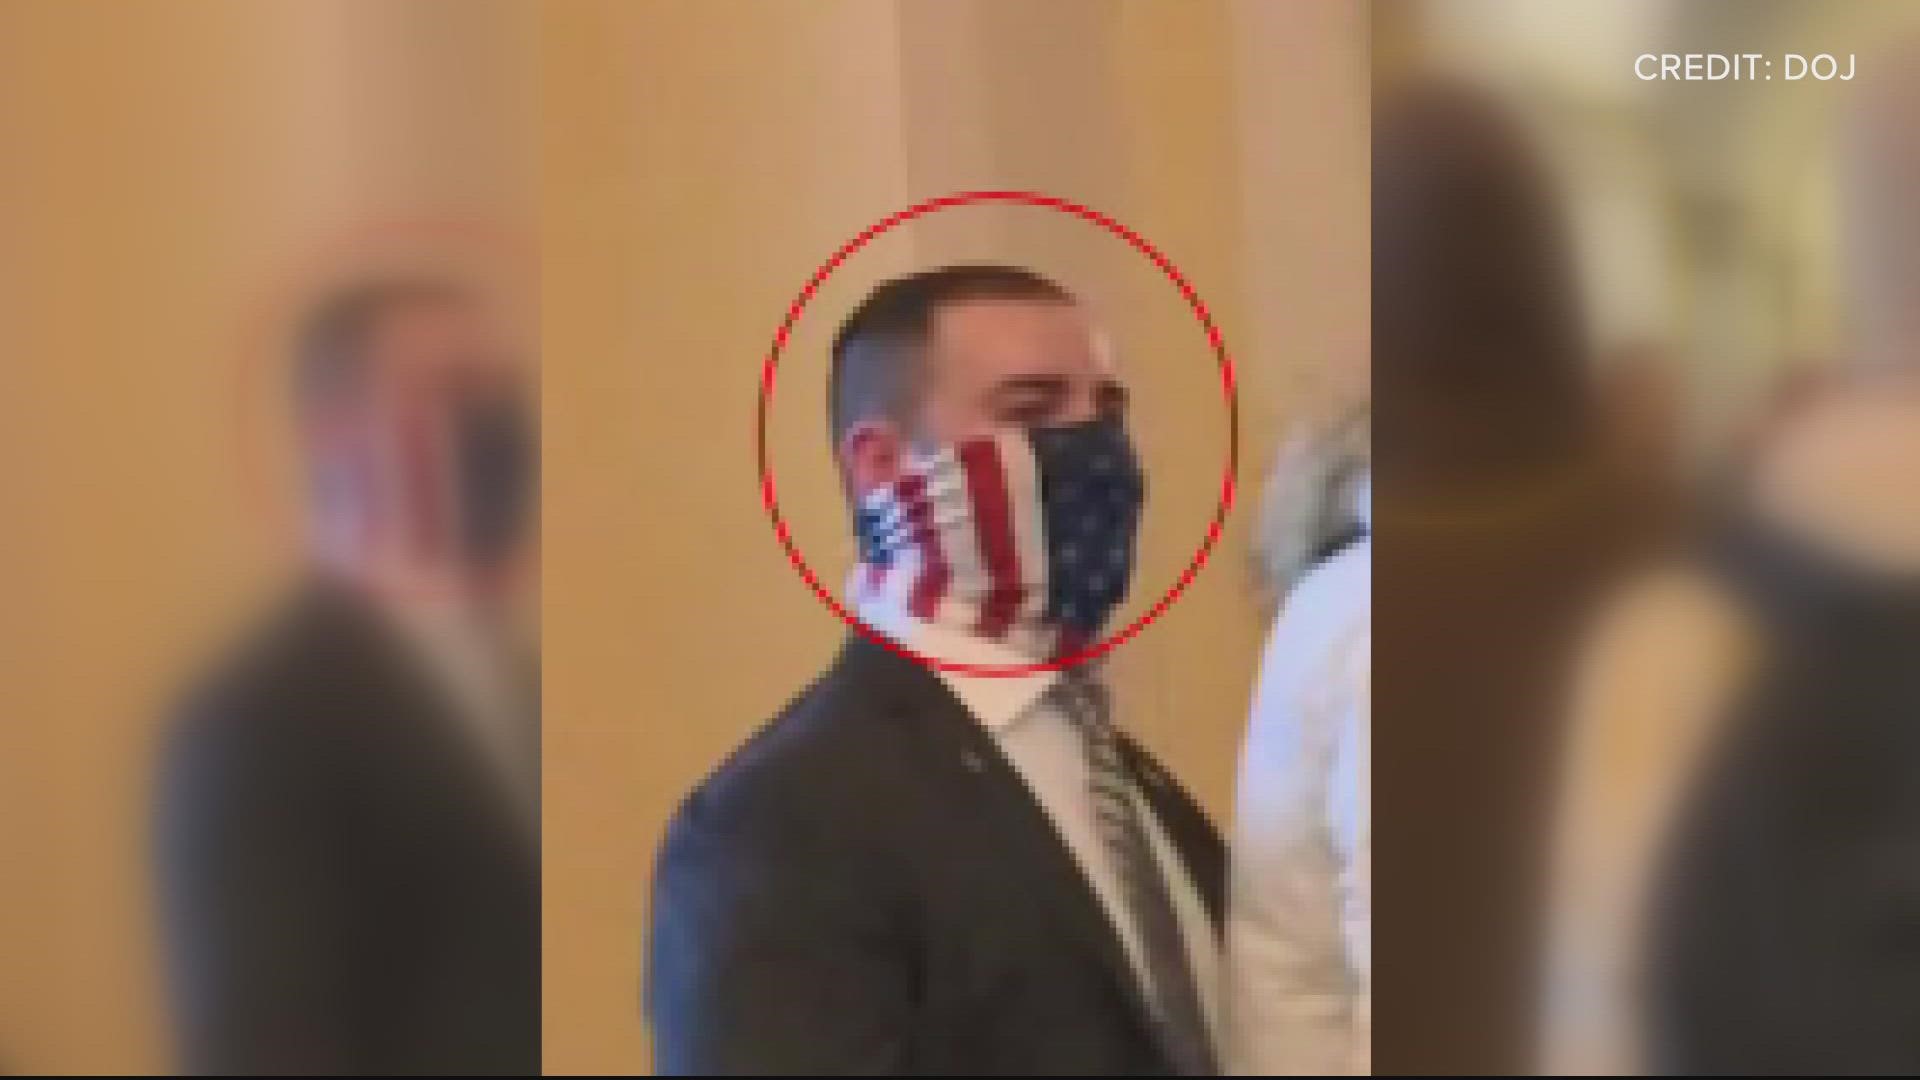 Federal Prosecutors say this is 23-year-old Joseph Brody. They say he assaulted a U-S Capitol Police officer during the riots